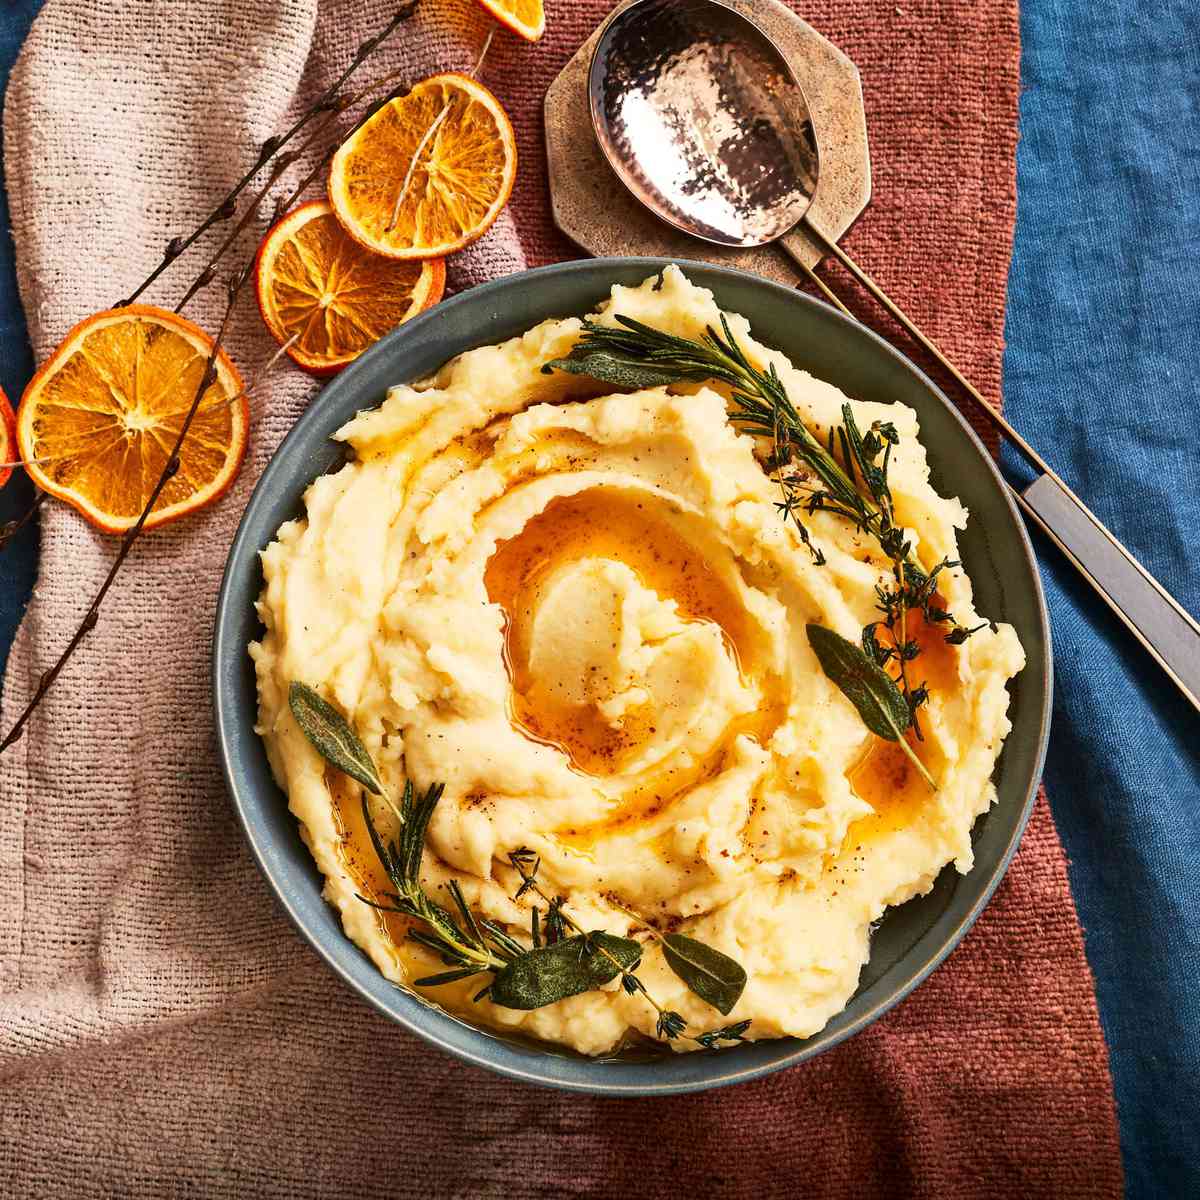 Lisa's Herbed Brown Butter Mashed Potatoes